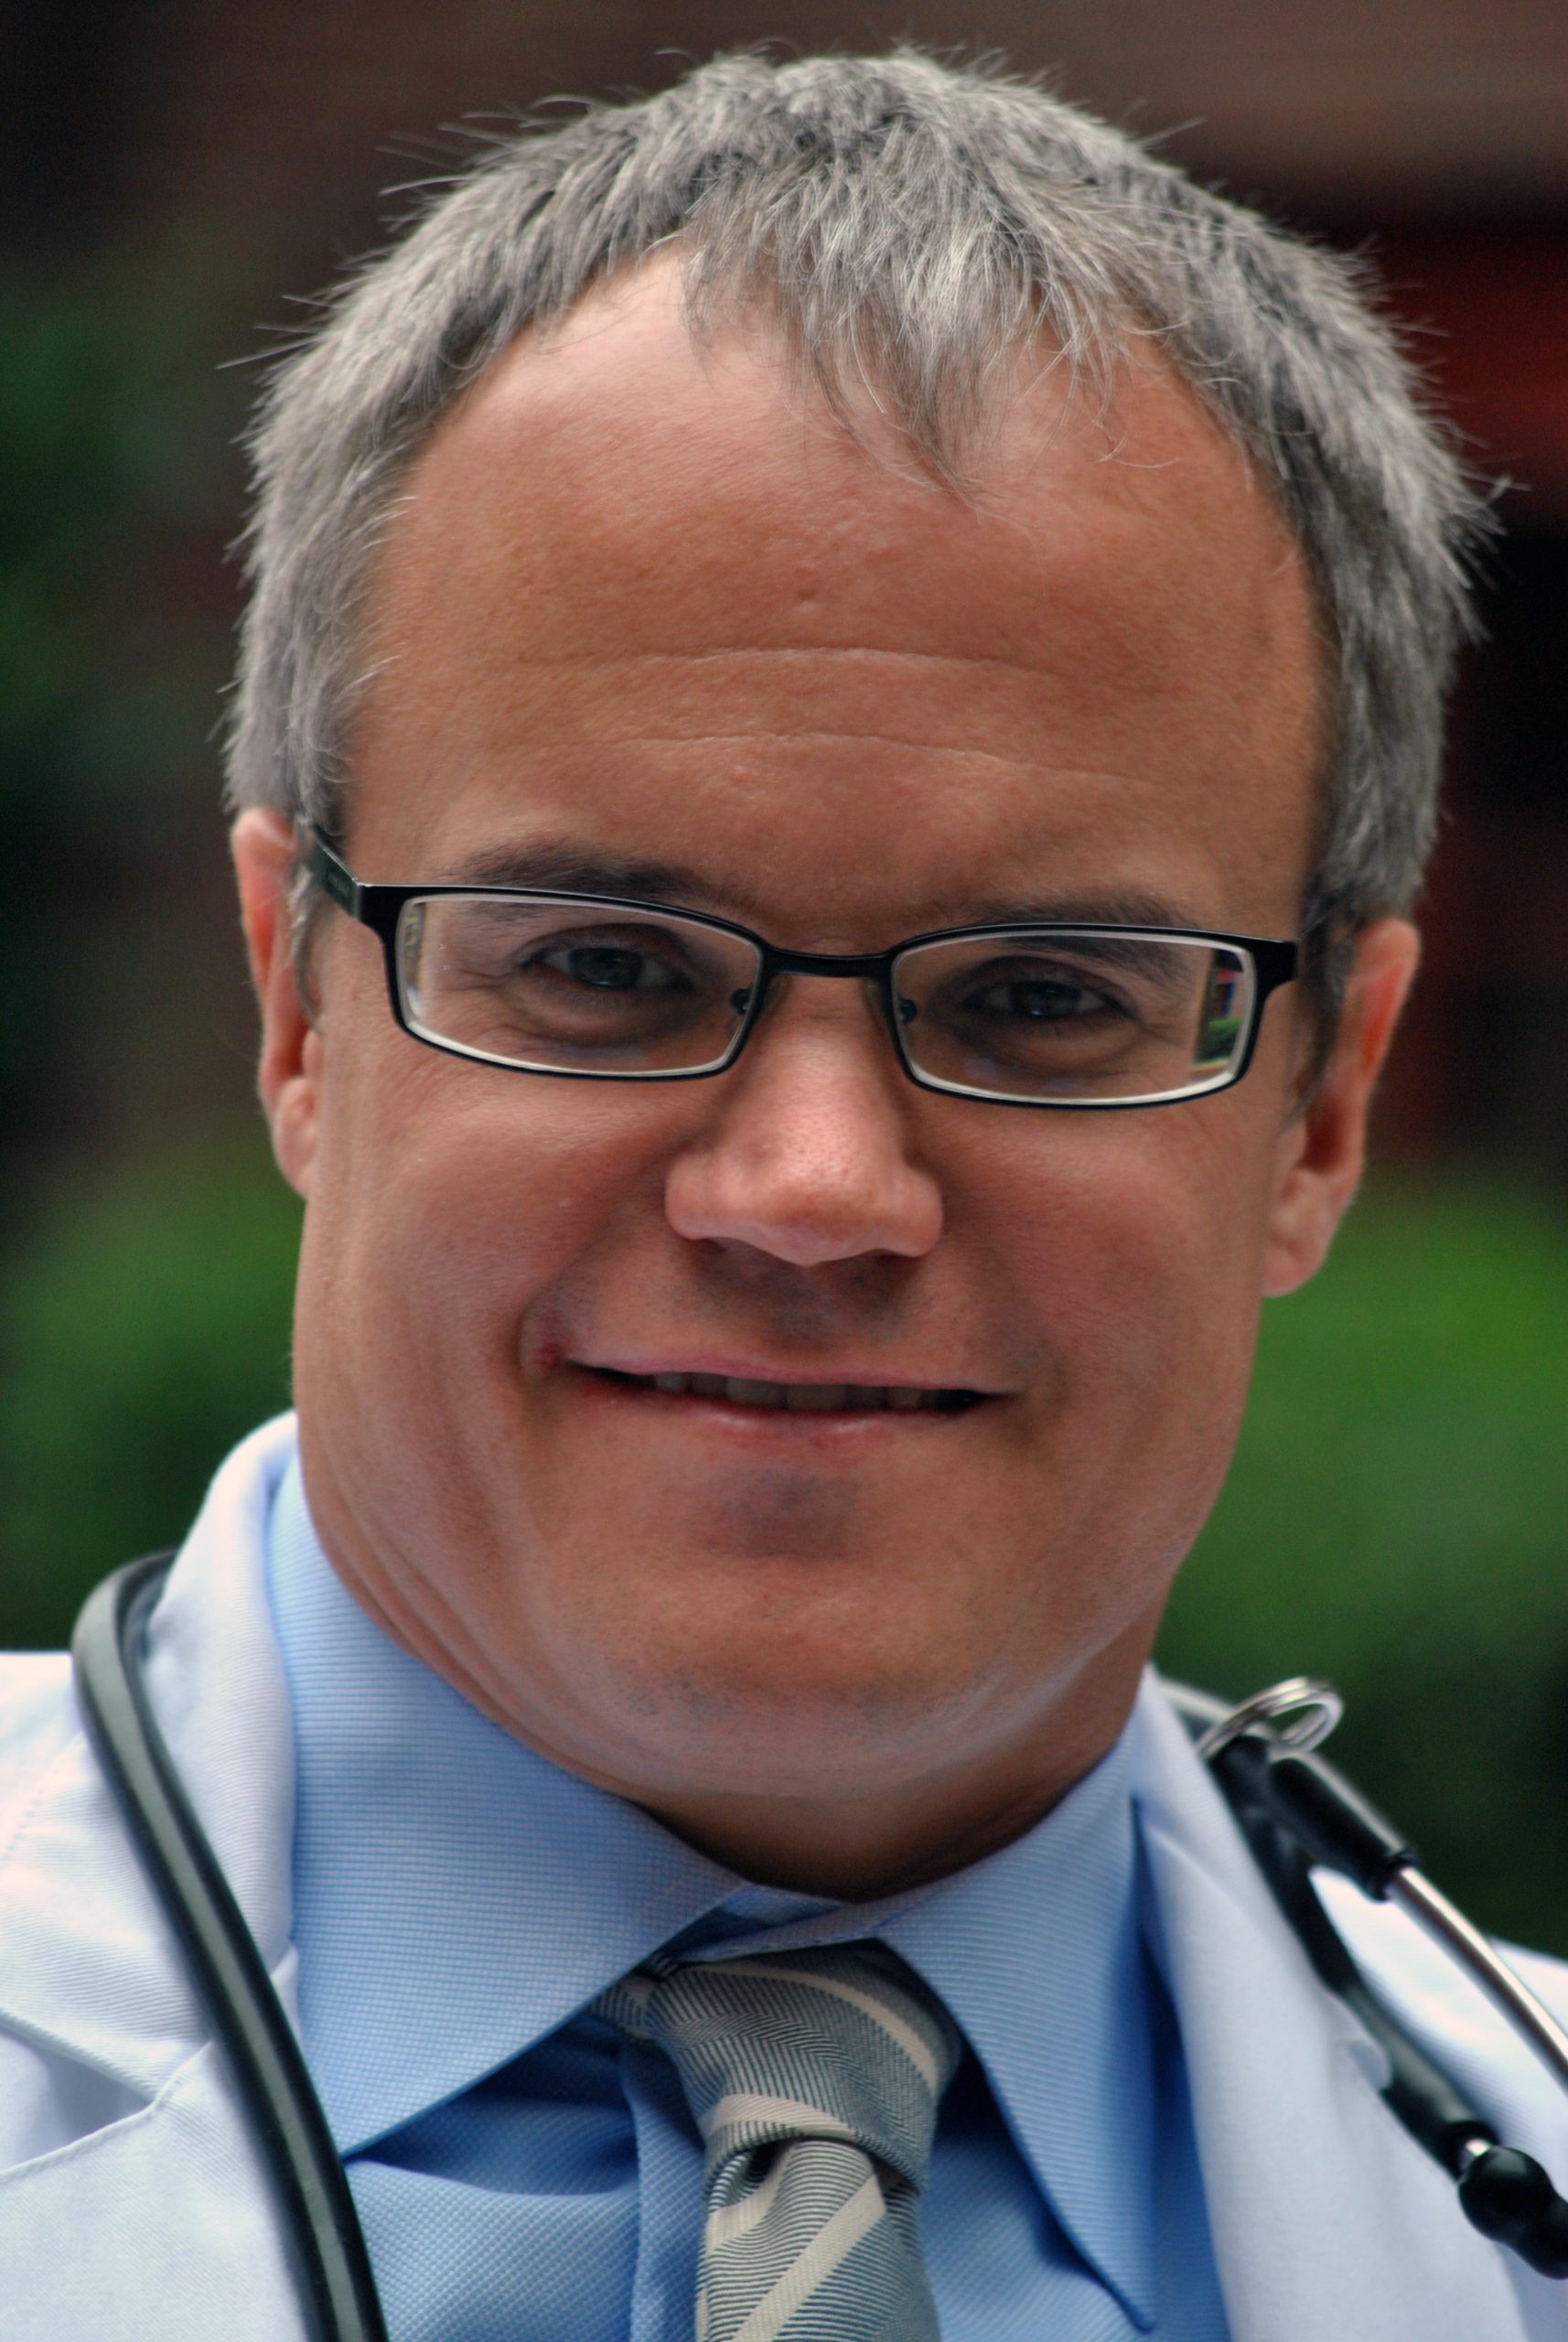 Director of the Division of Geriatrics Emergency Medicine and Associate Professor of Emergency Medicine and Internal Medicine, UNC School of Medicine